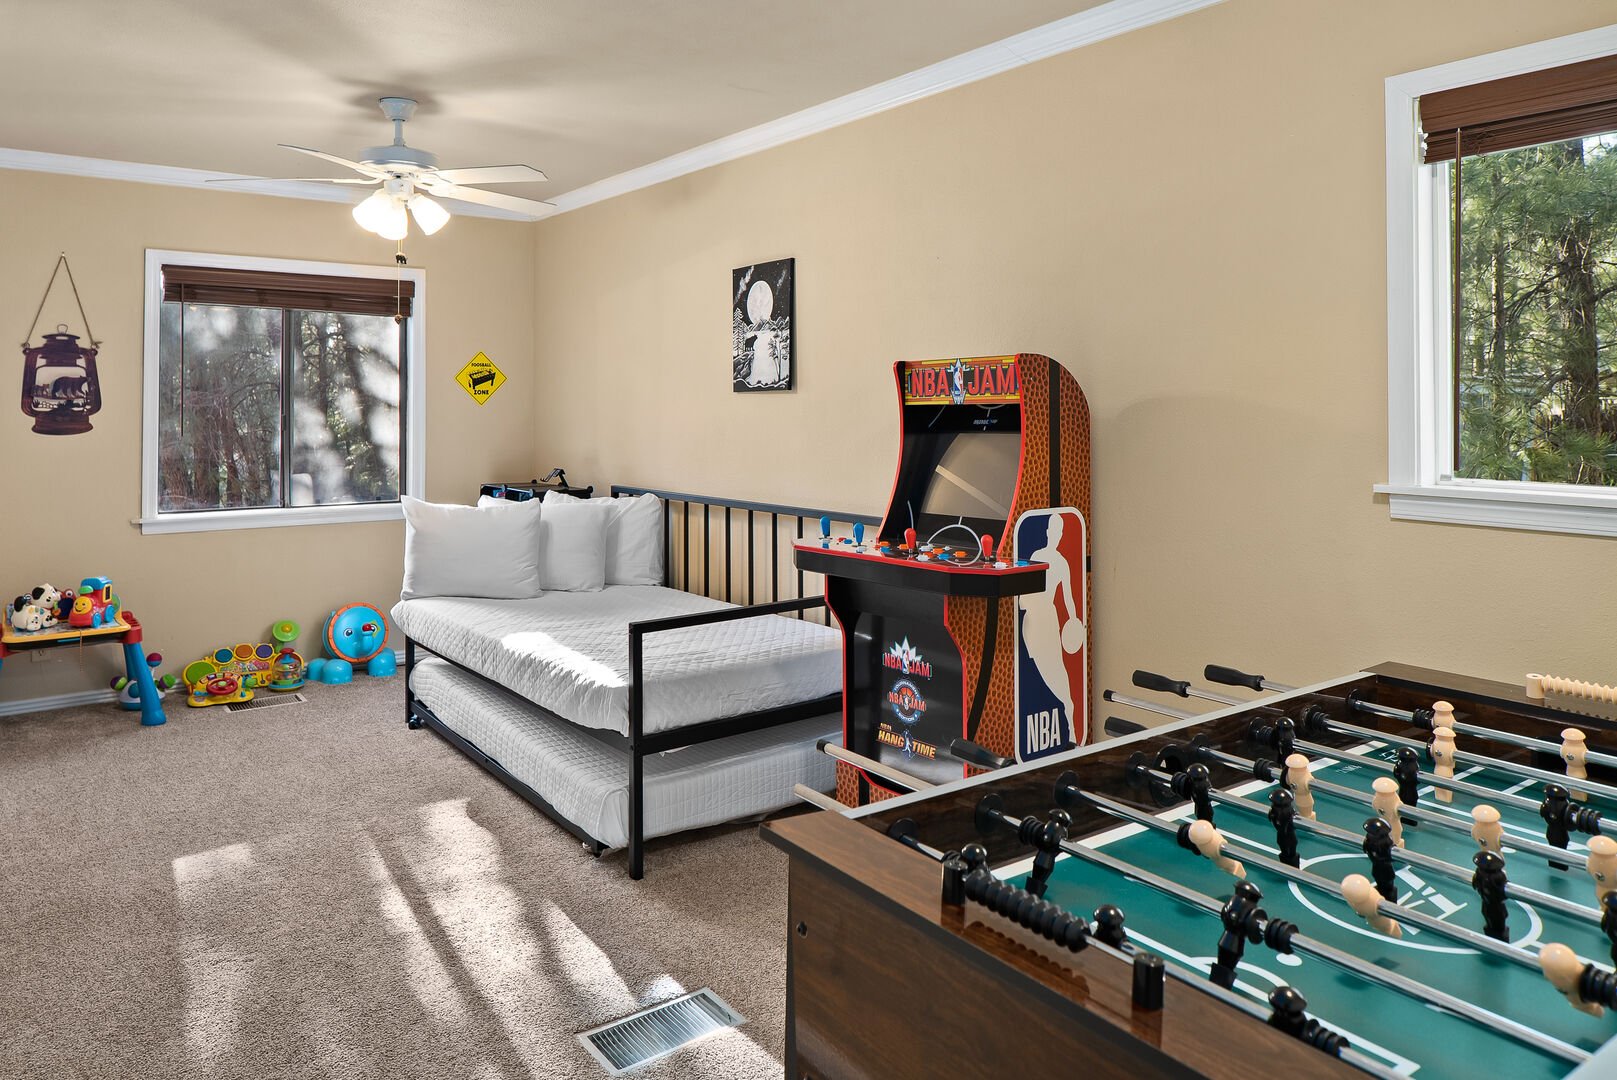 Bedroom 3 offers toys and books for the kids, NBA Jam Arcade and a Foosball table.